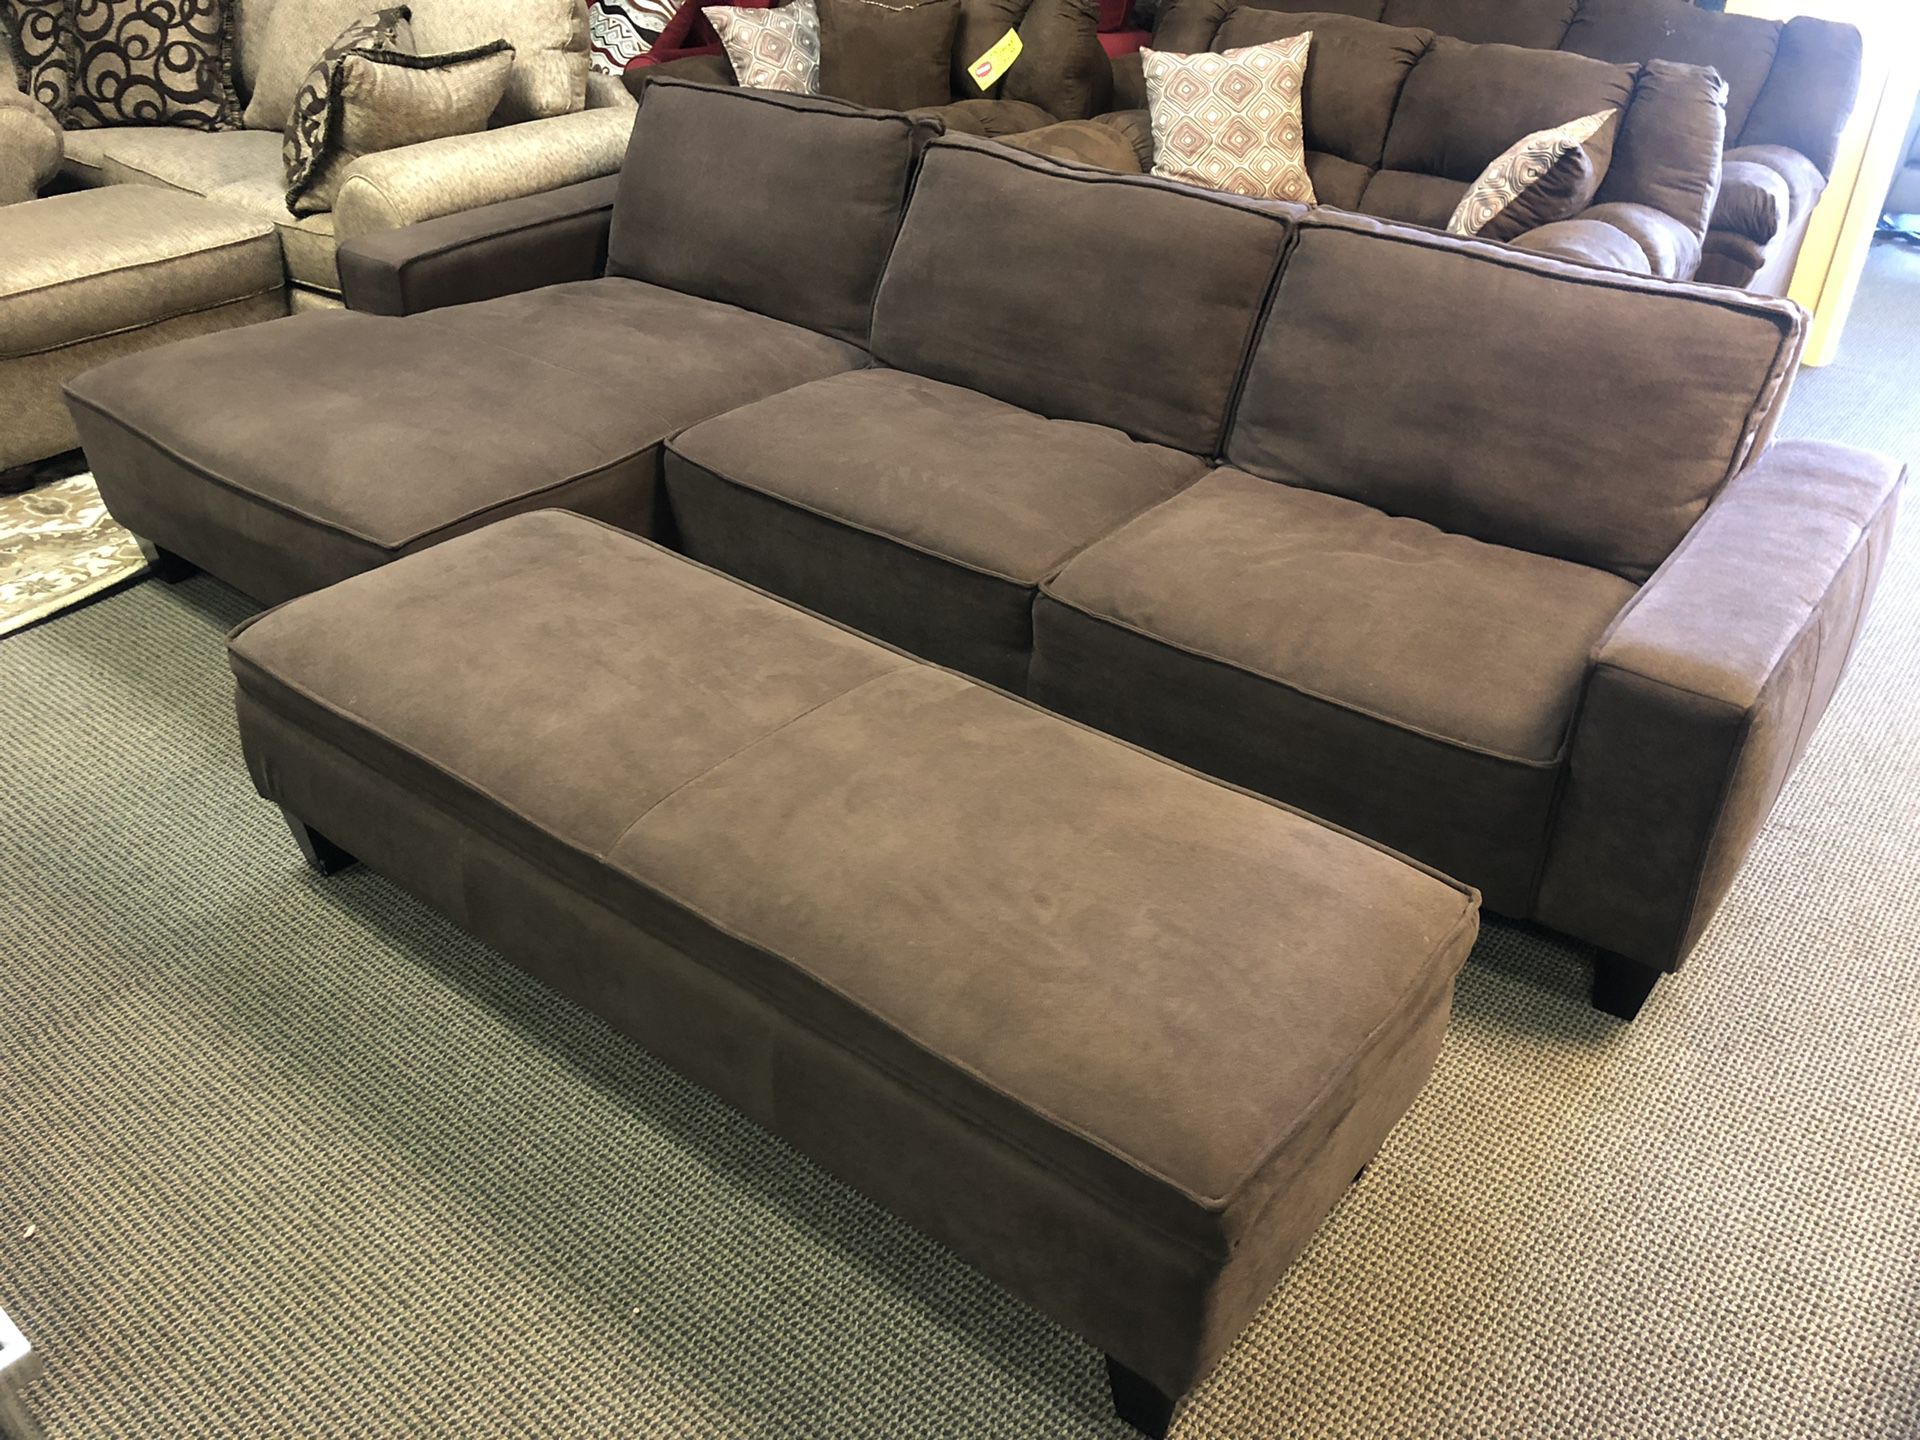 Sofa sectional with storage ottoman